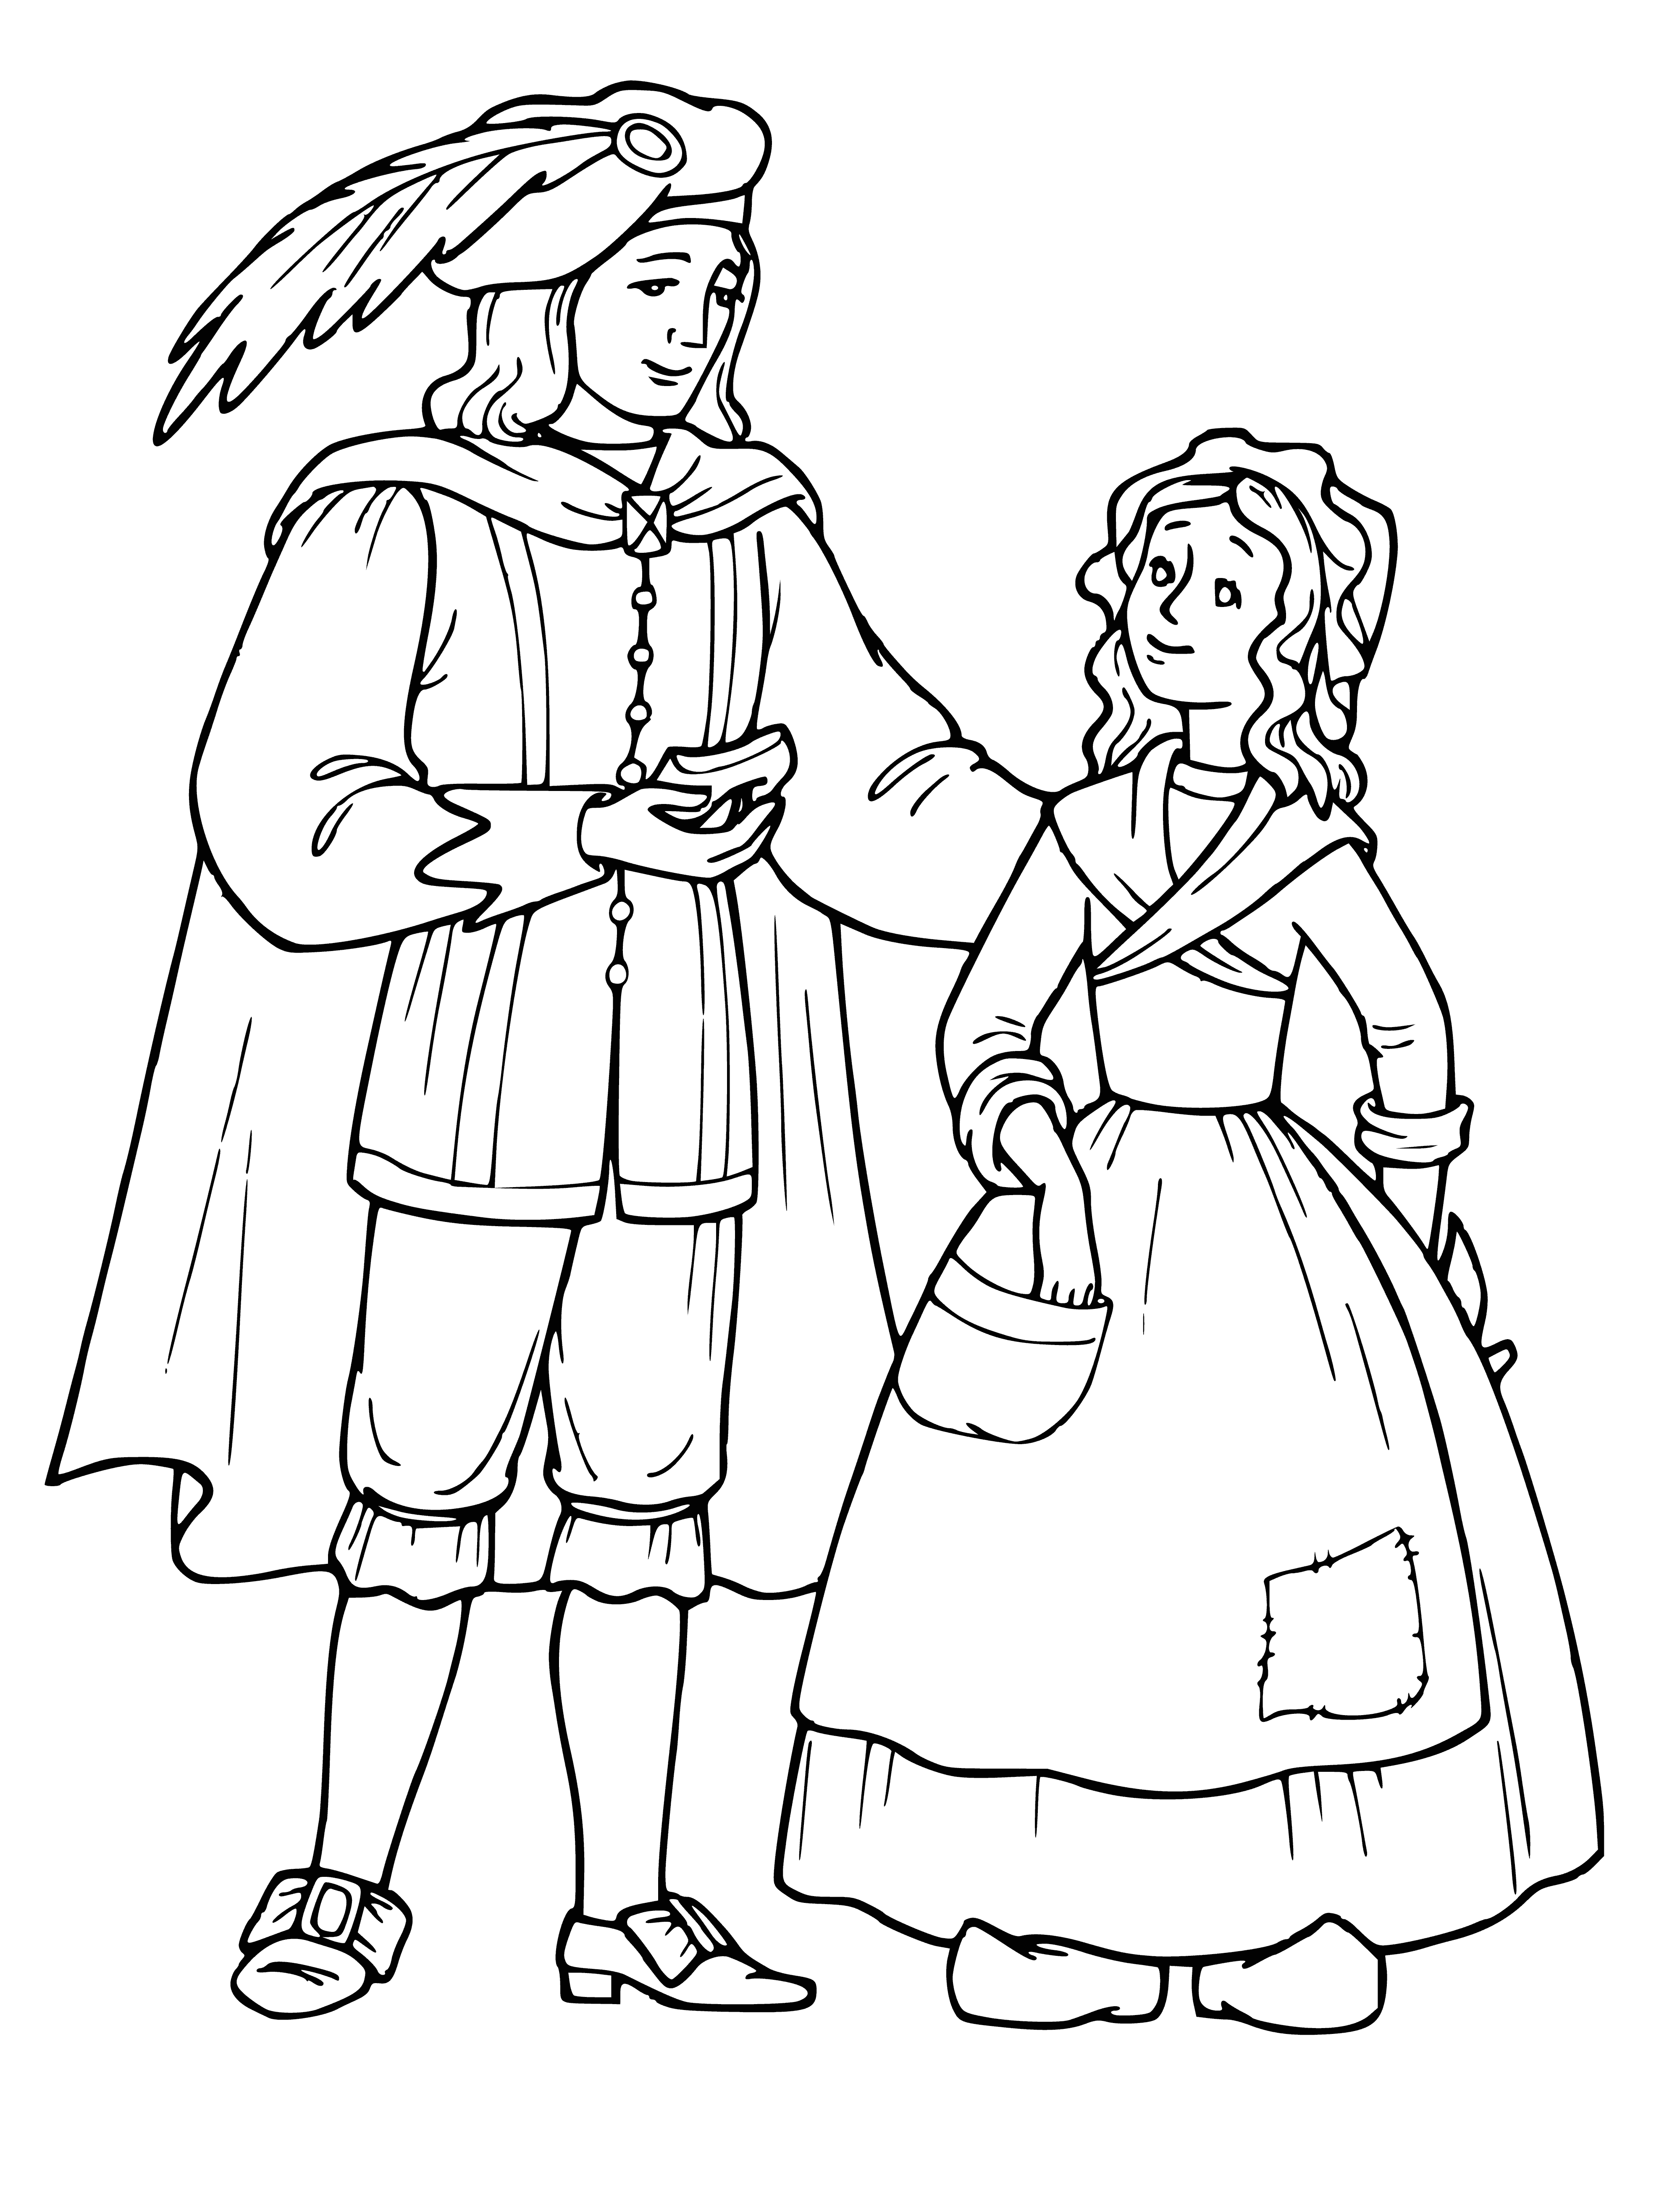 coloring page: Cinderella is a beautiful young woman standing before a majestic castle that her admirers admire. She sports a pink dress, white apron, and black spot on her cheek.